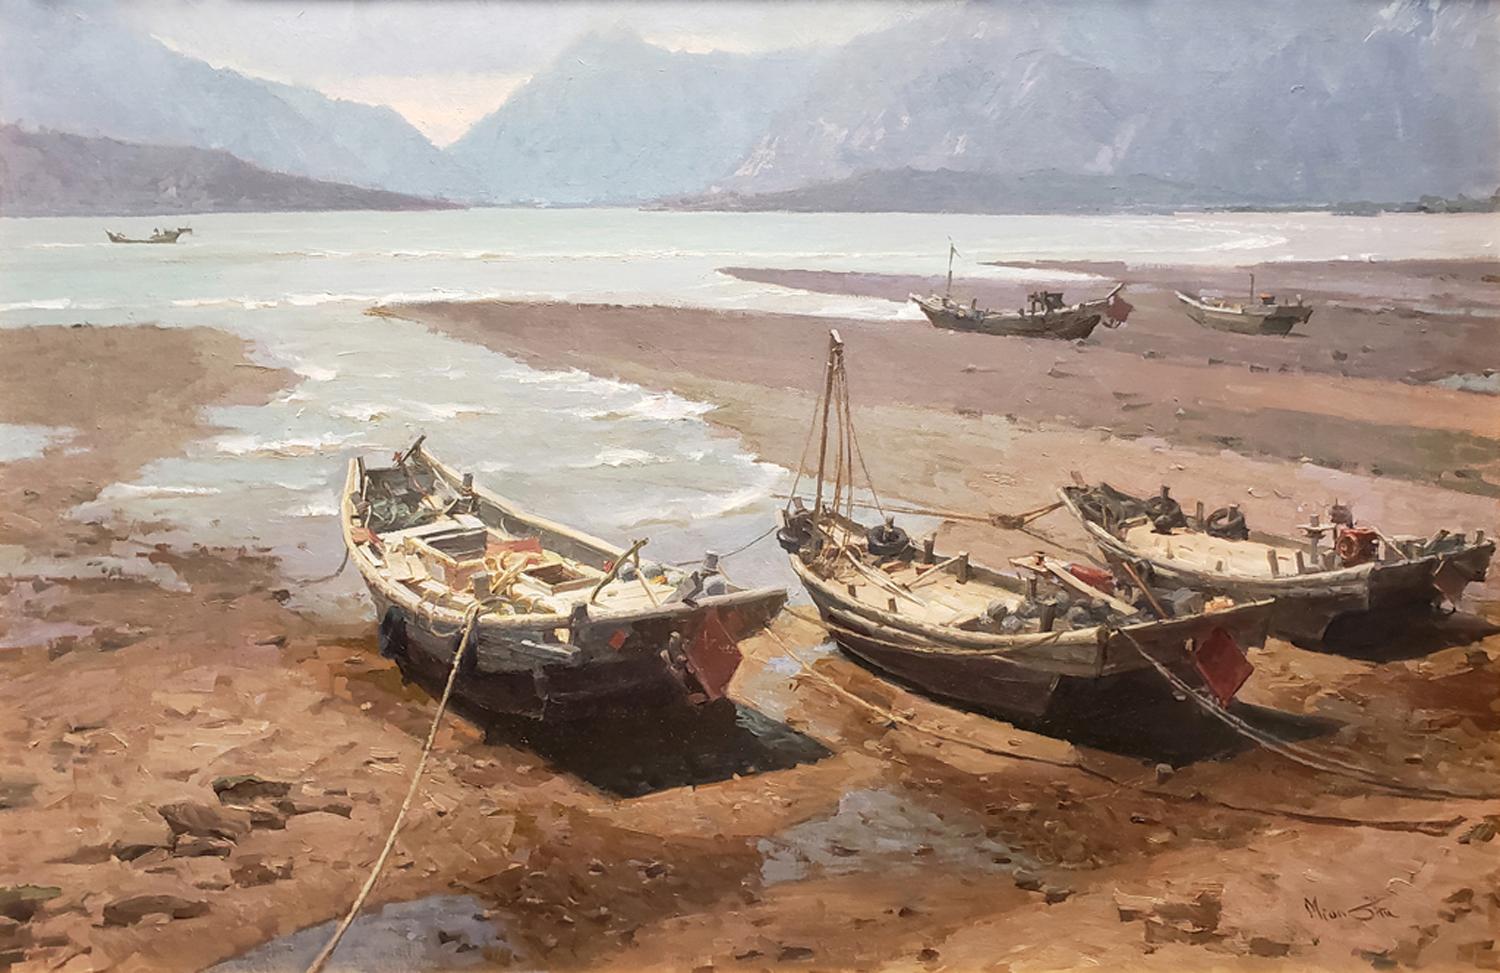 Old Fishing Boats in Laoshan - Painting by Mian Situ